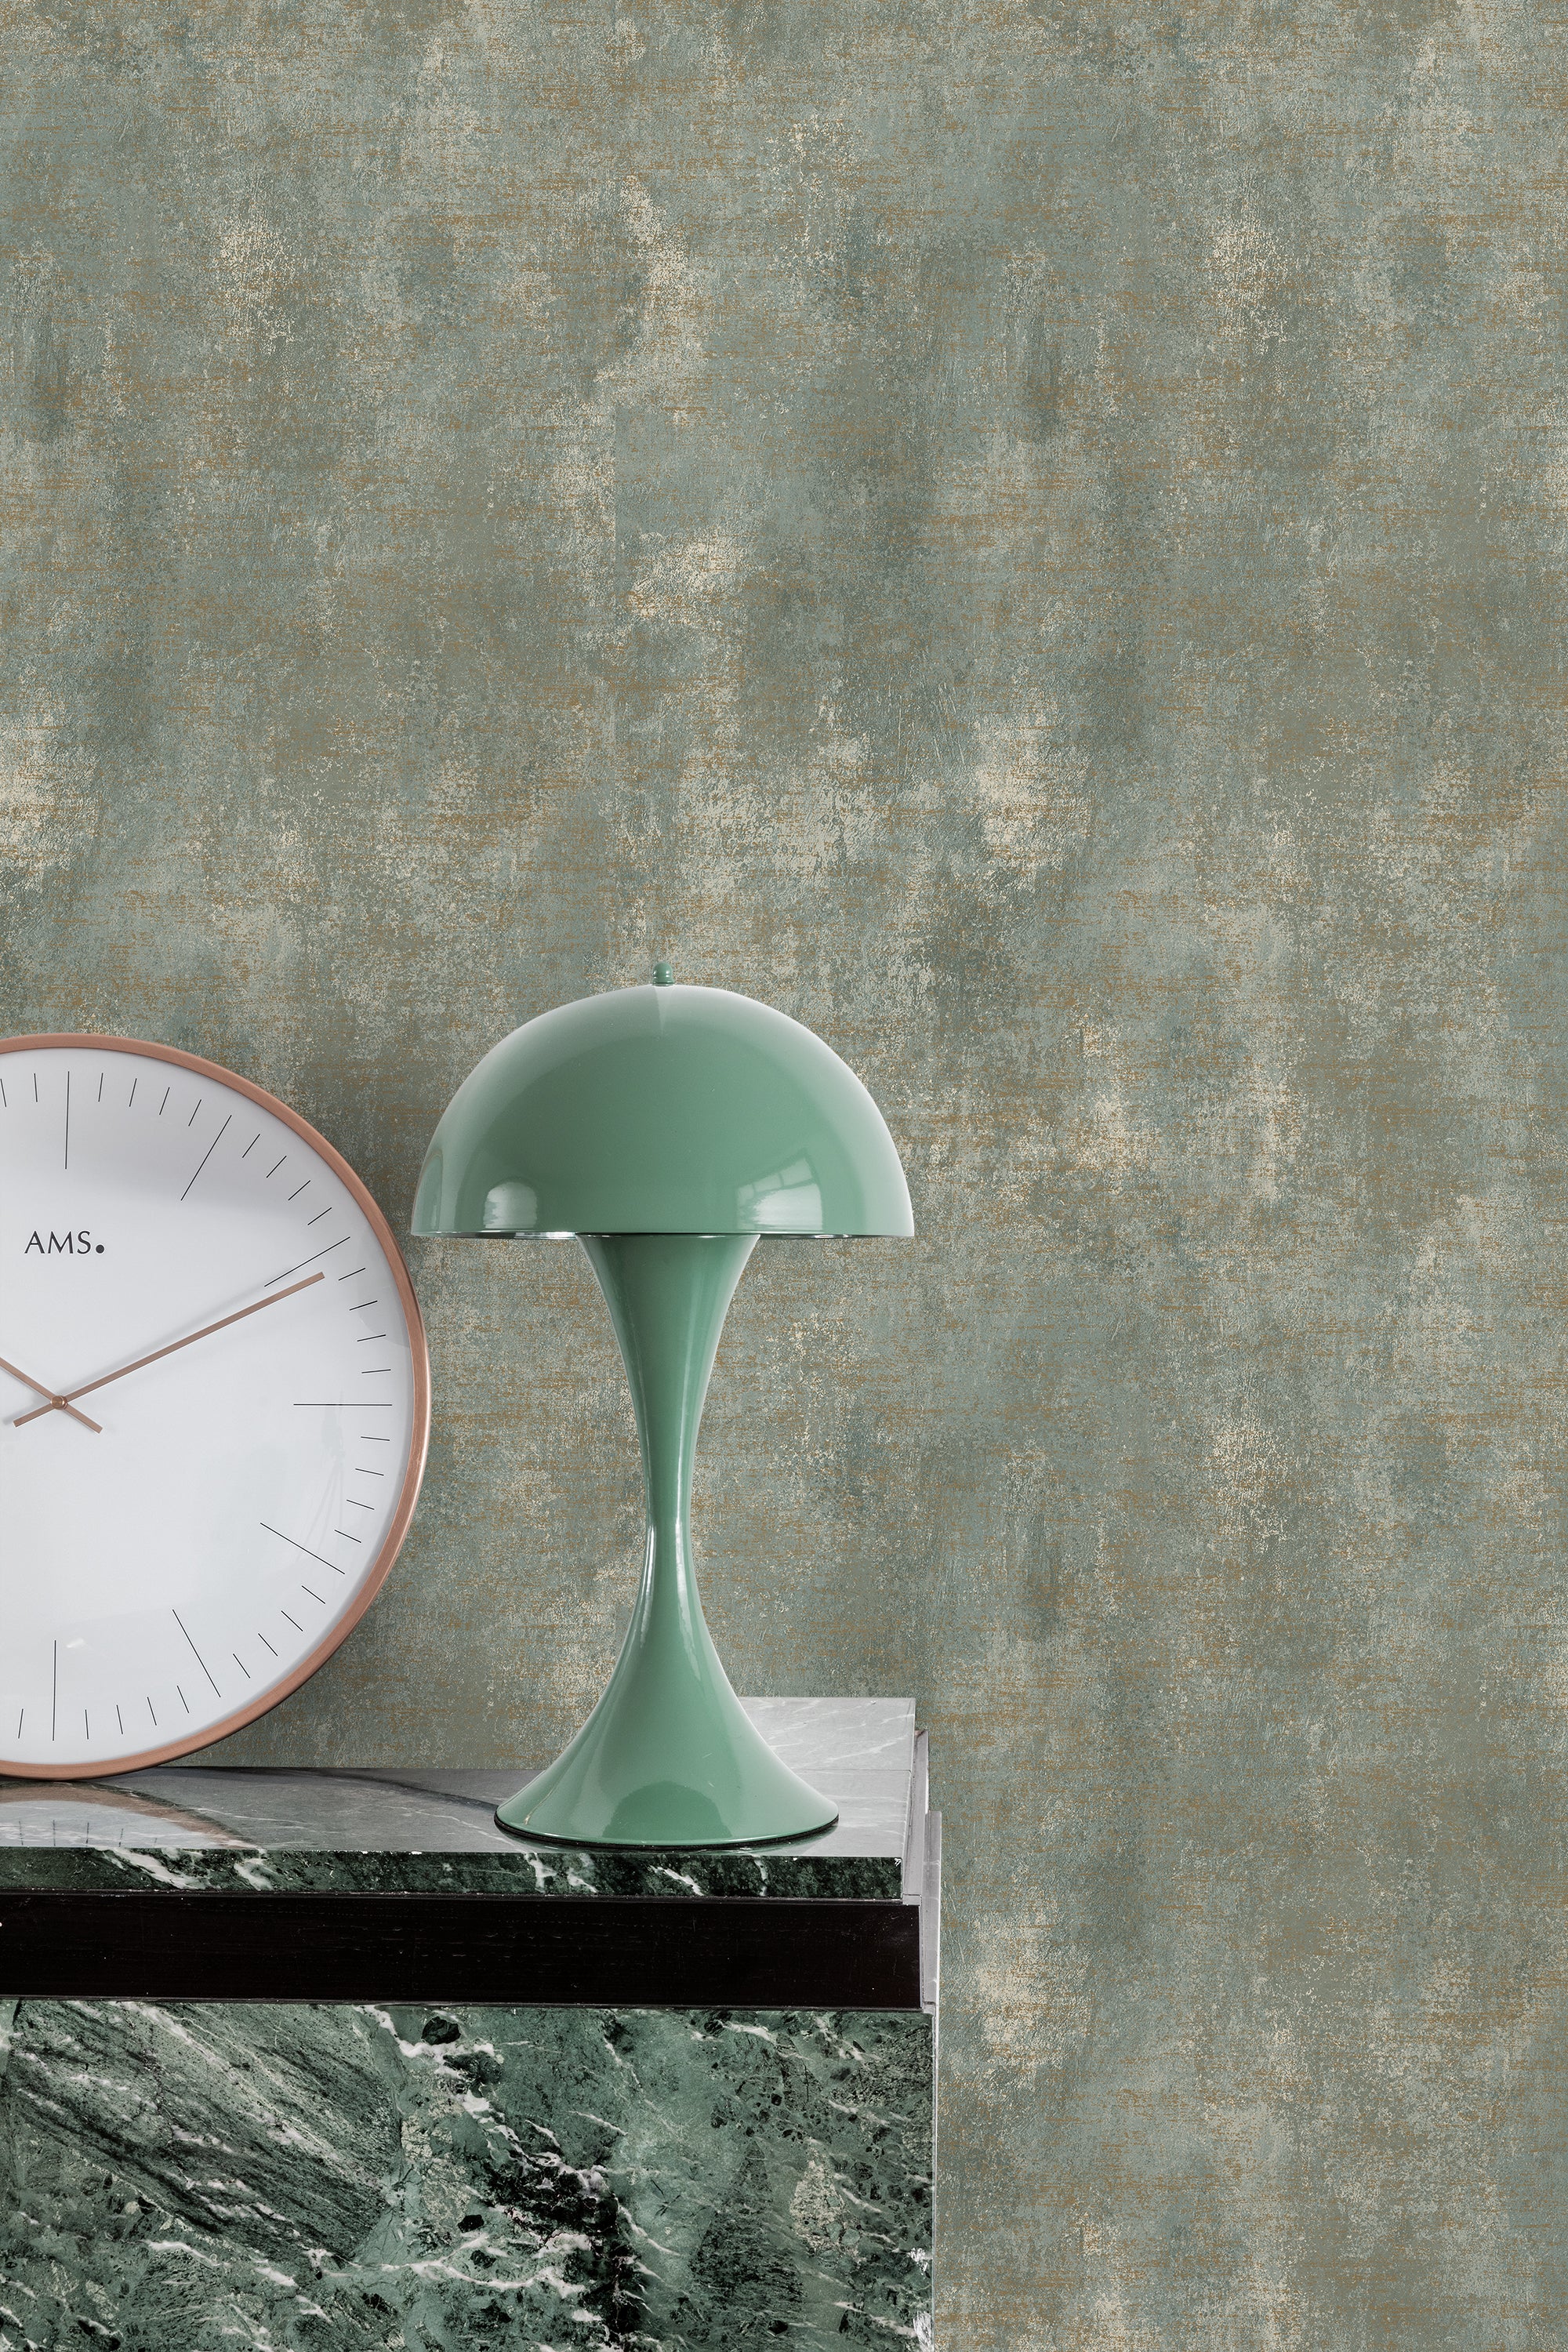 Textured Plain Teal Wallpaper | Grandeco Wallcoverings | A67902